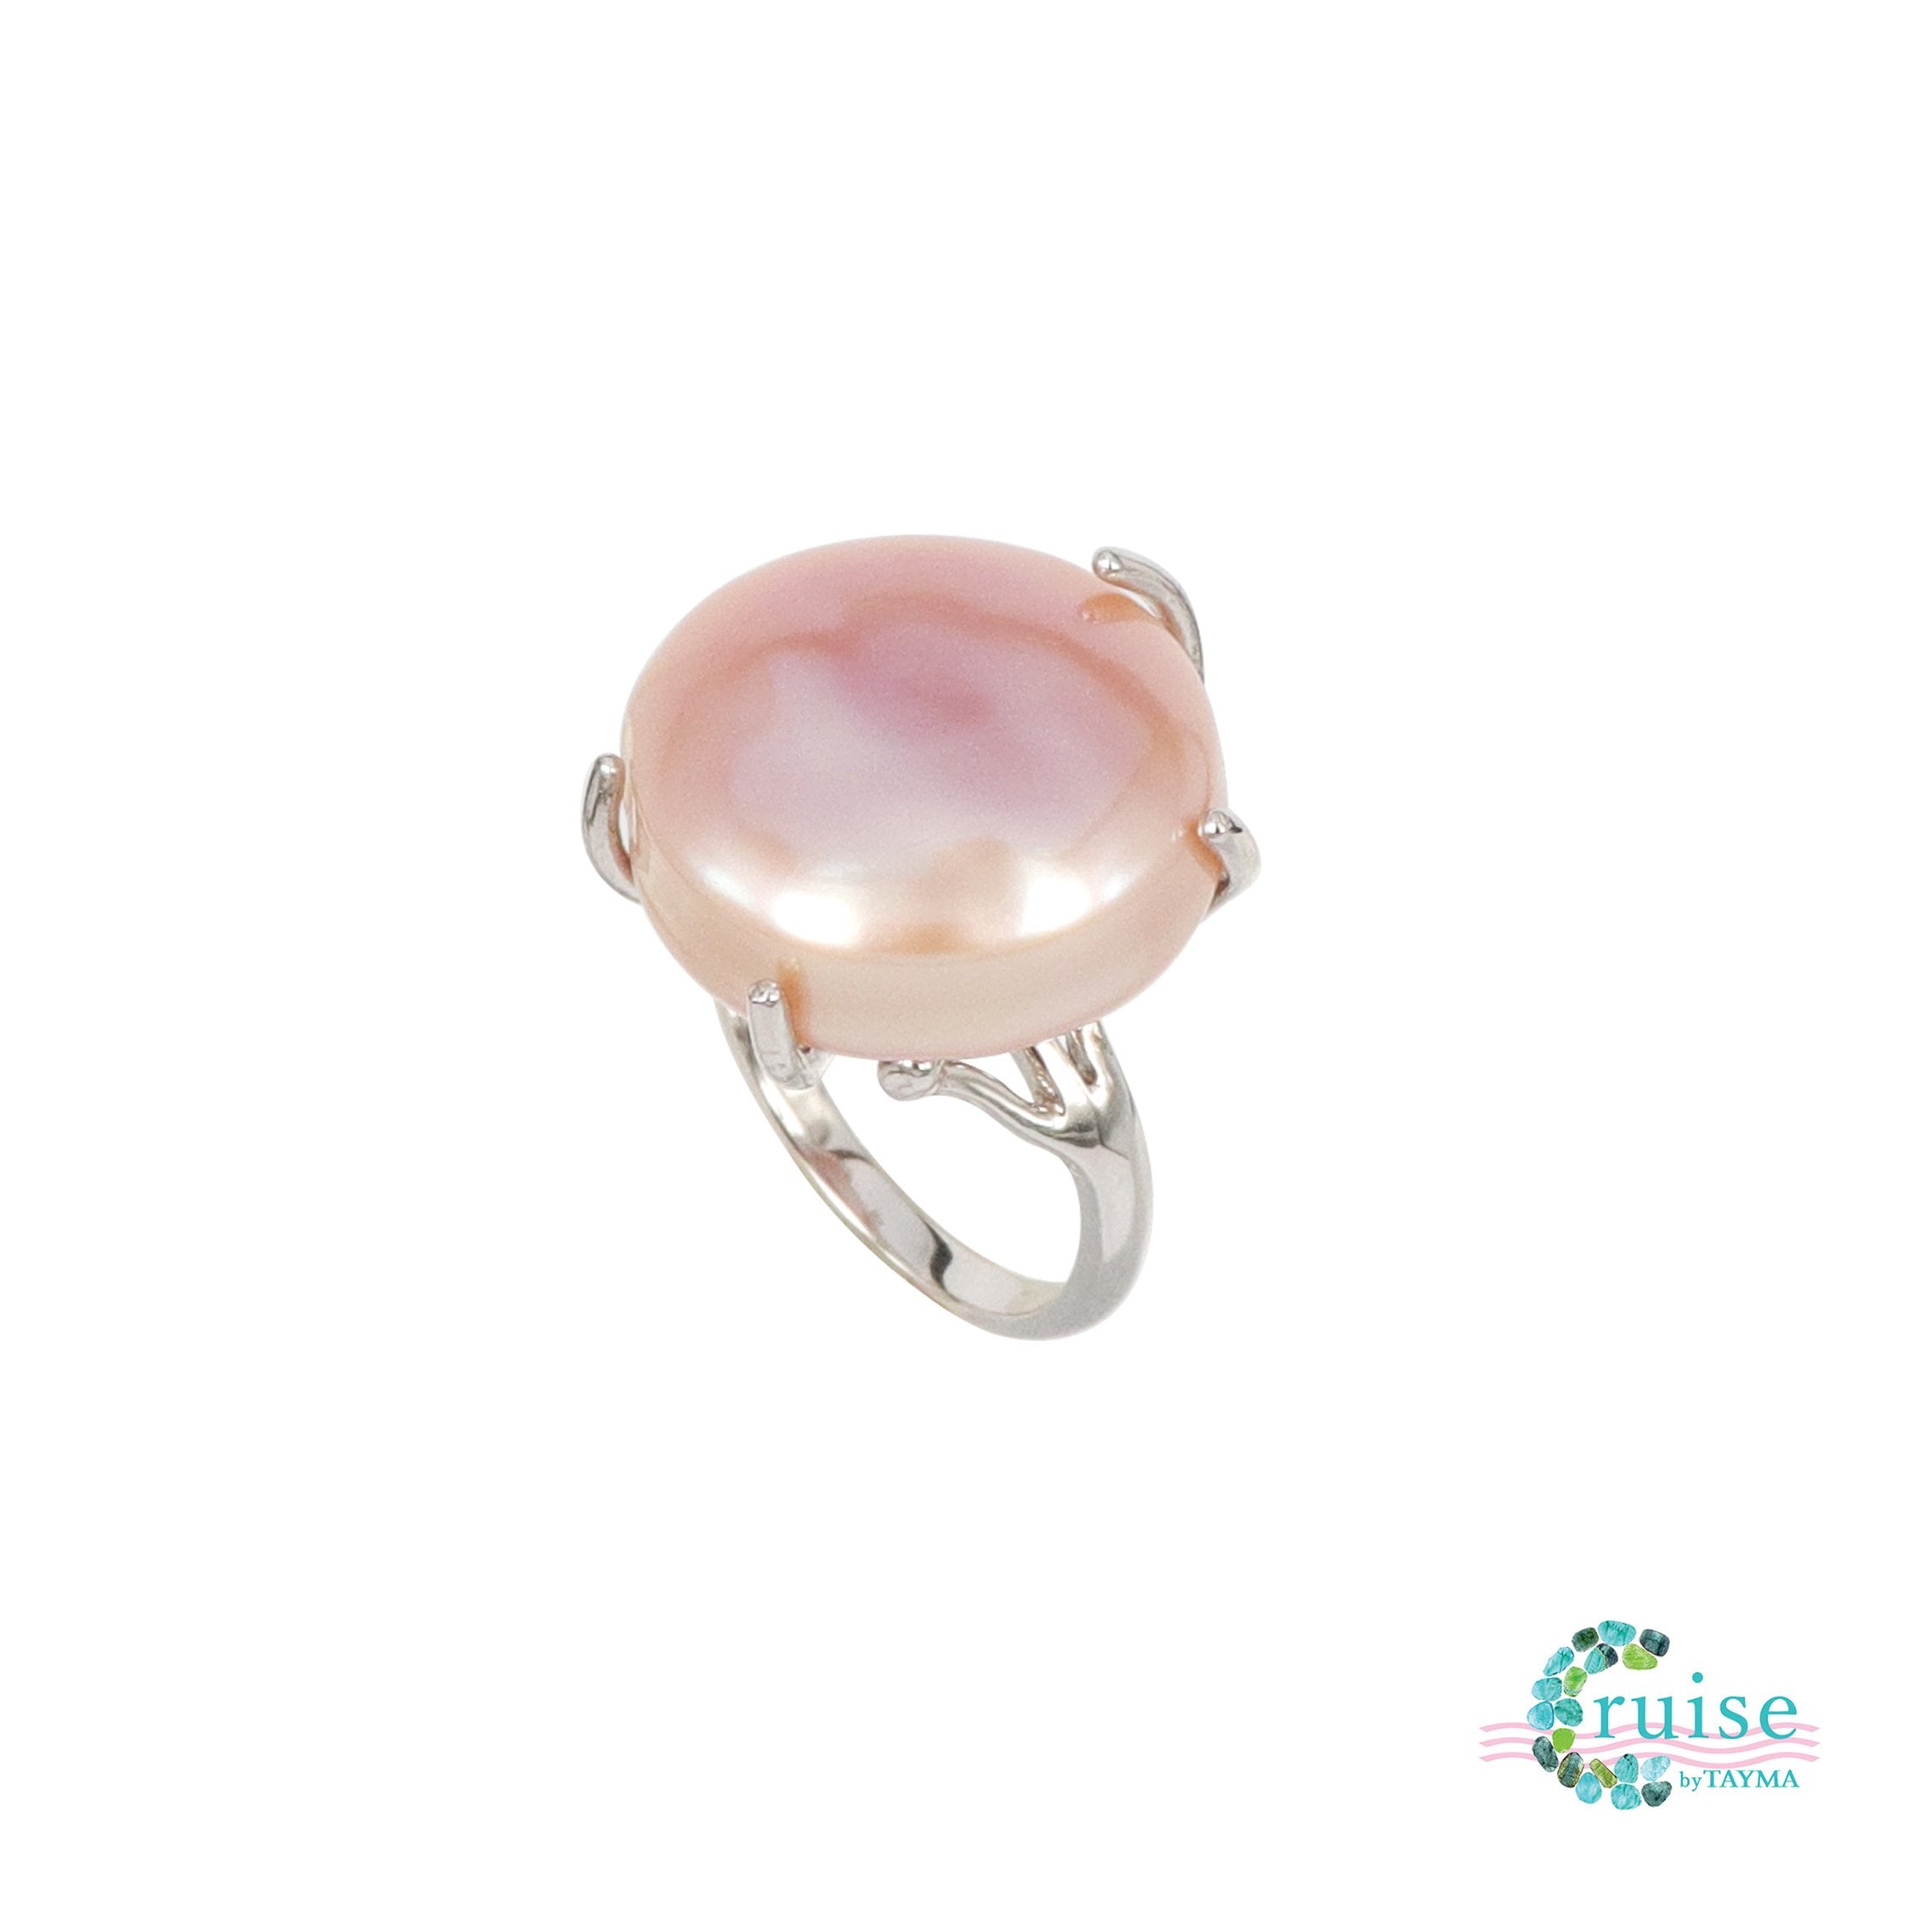 One of a kind - Pink Pearl Ring - Shipwreck Treasures of the Keys